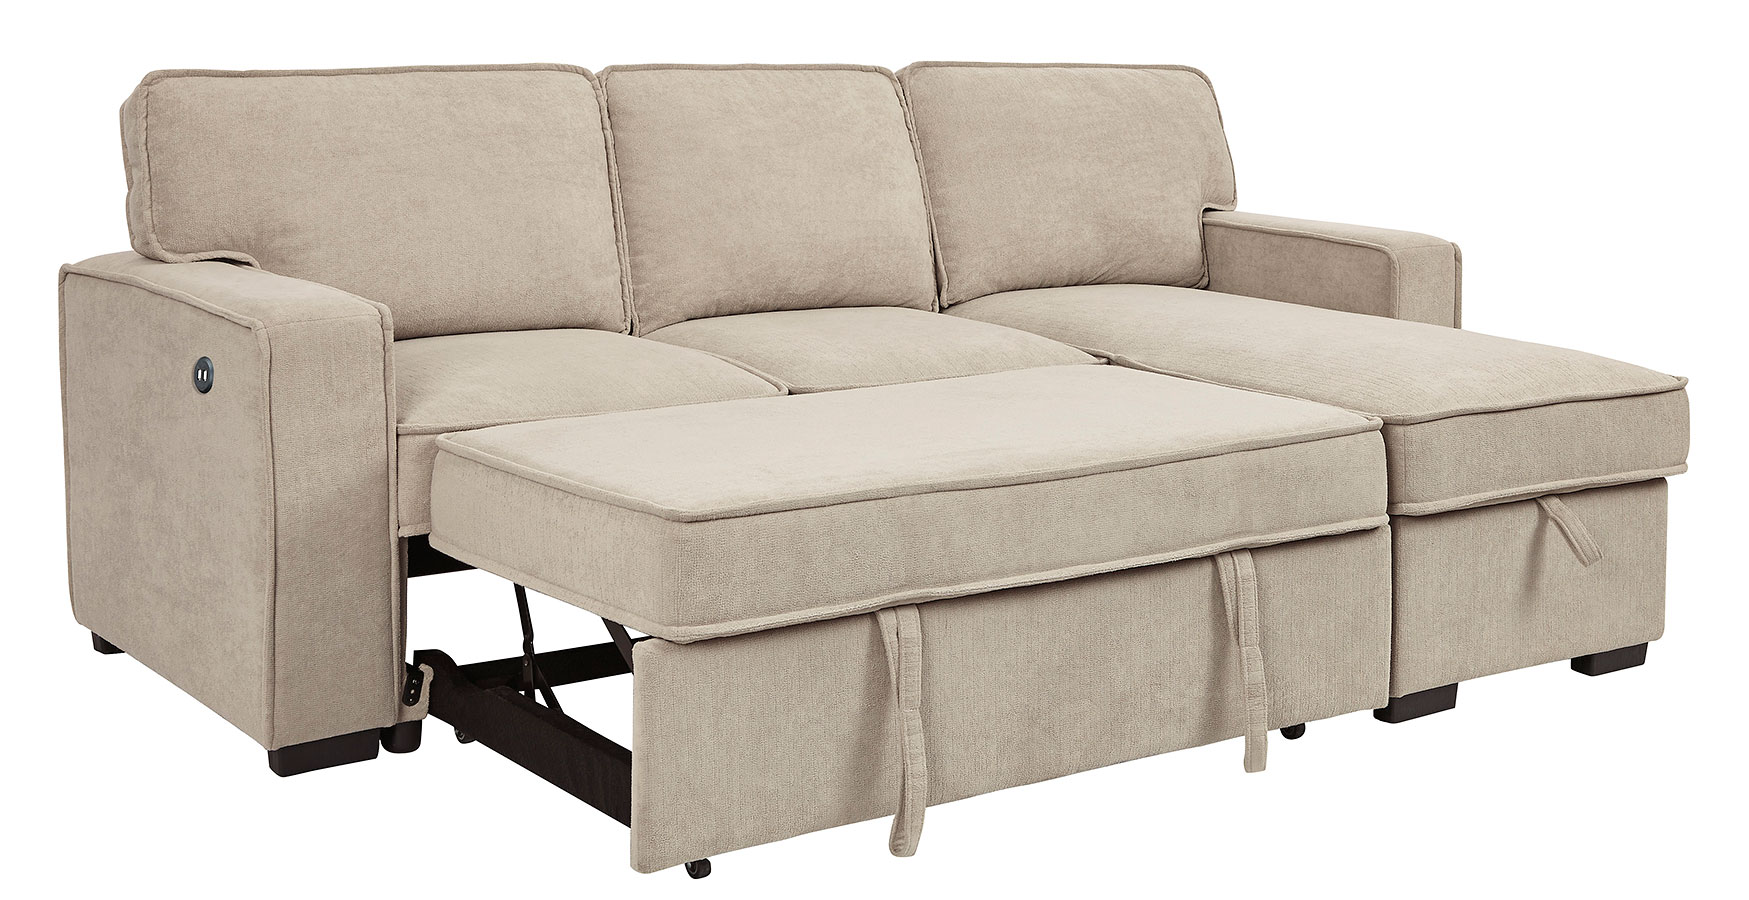 victor pop up sofa bed review